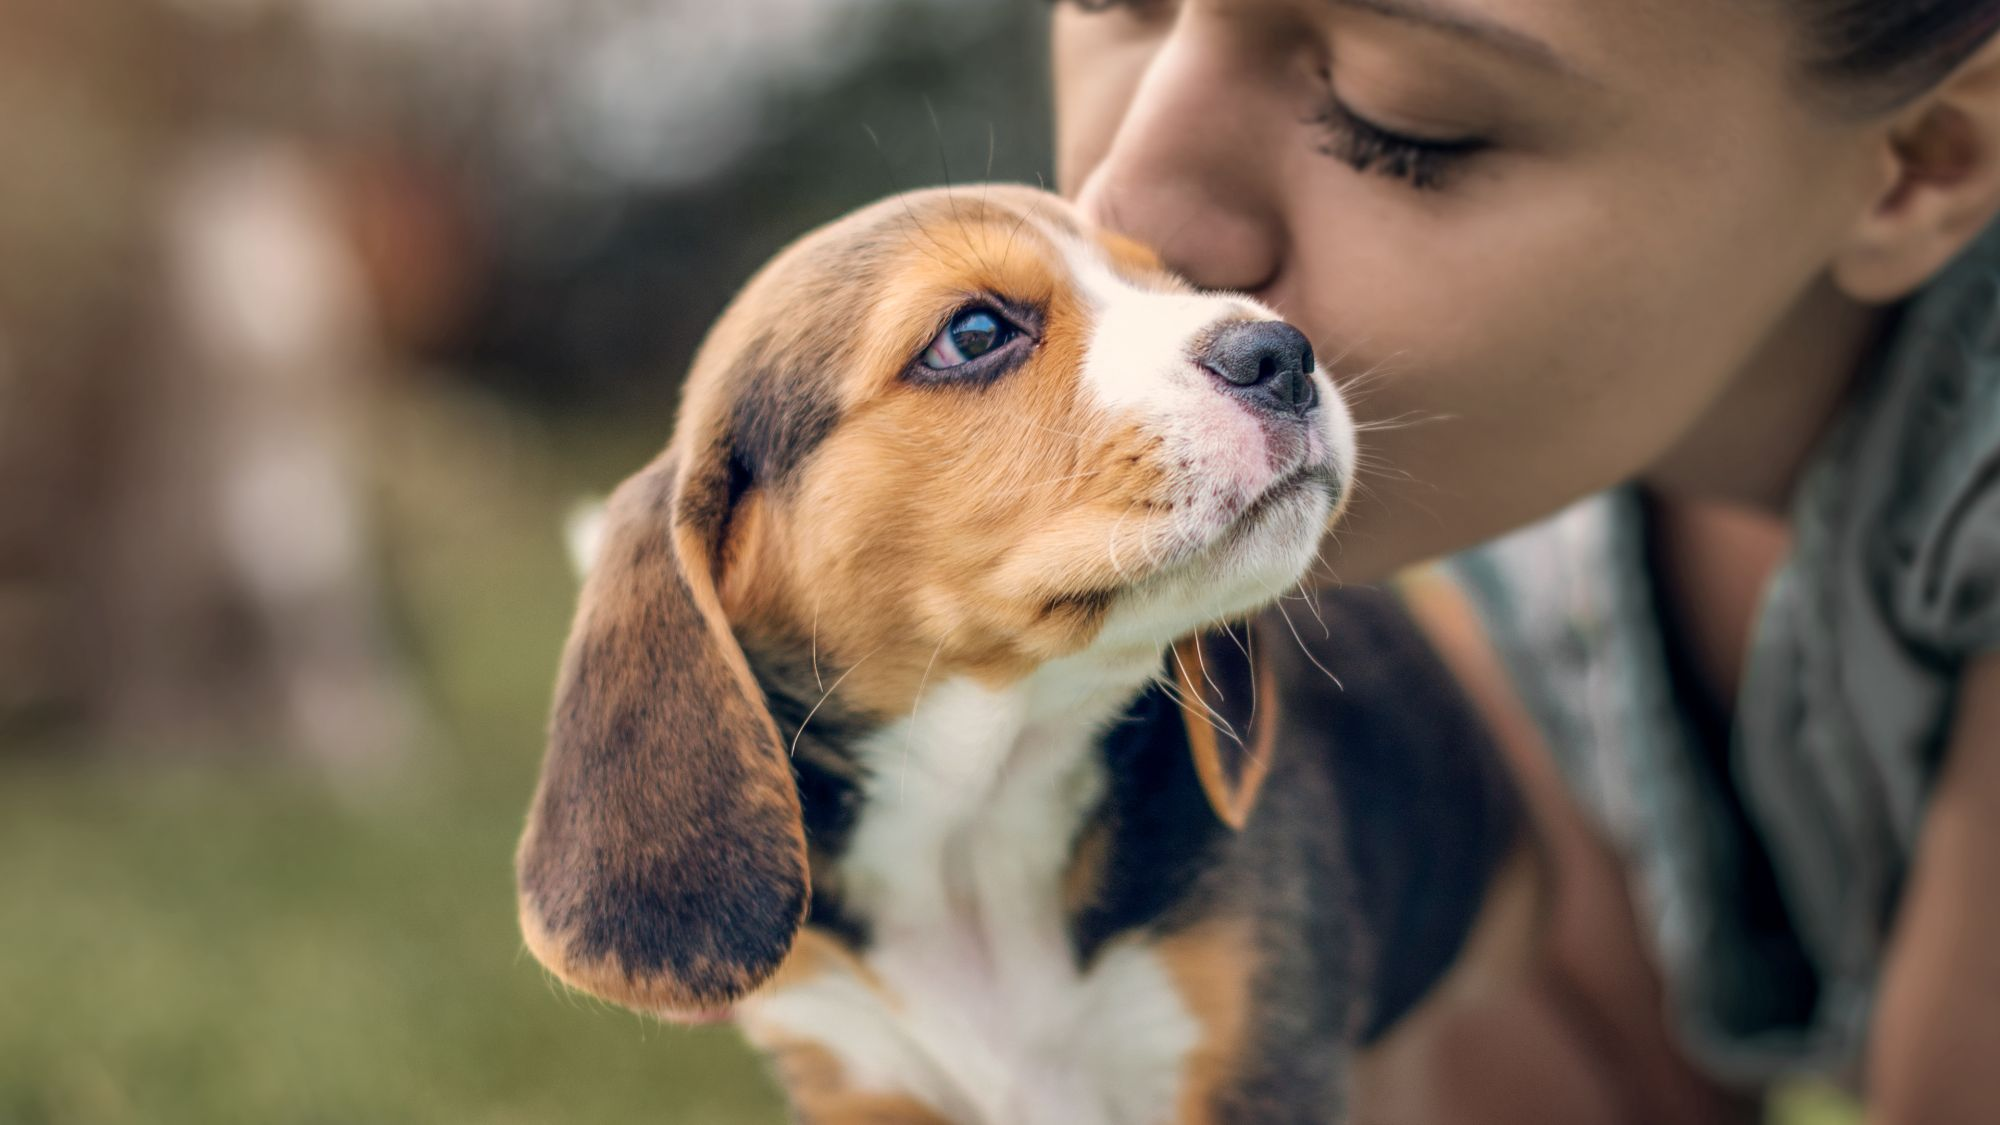 Beagle puppy standing on a blanket outdoors with owner